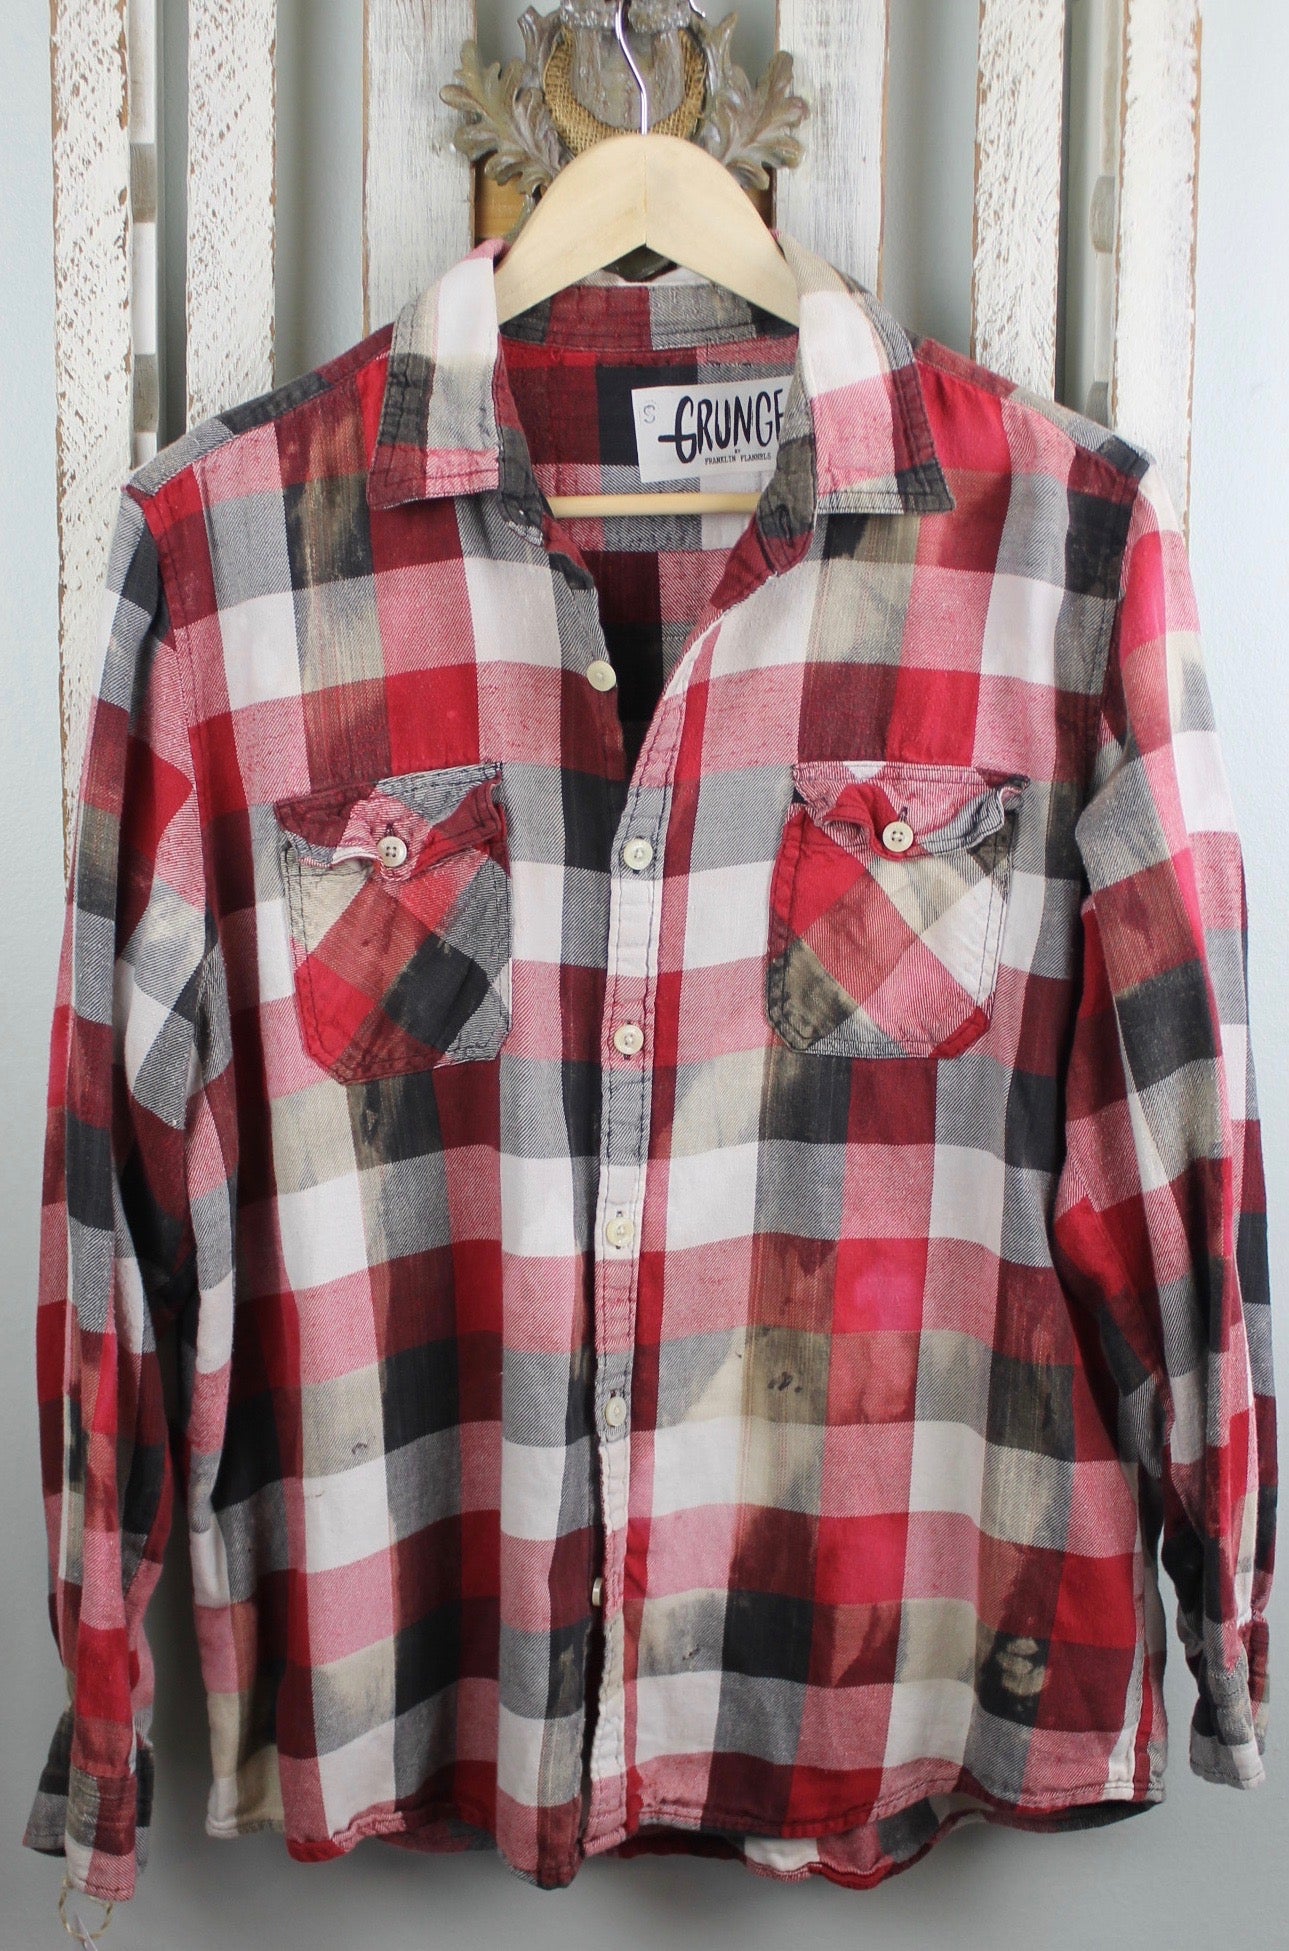 Grunge Red, Black and White Flannel Size Small – FranklinFlannels